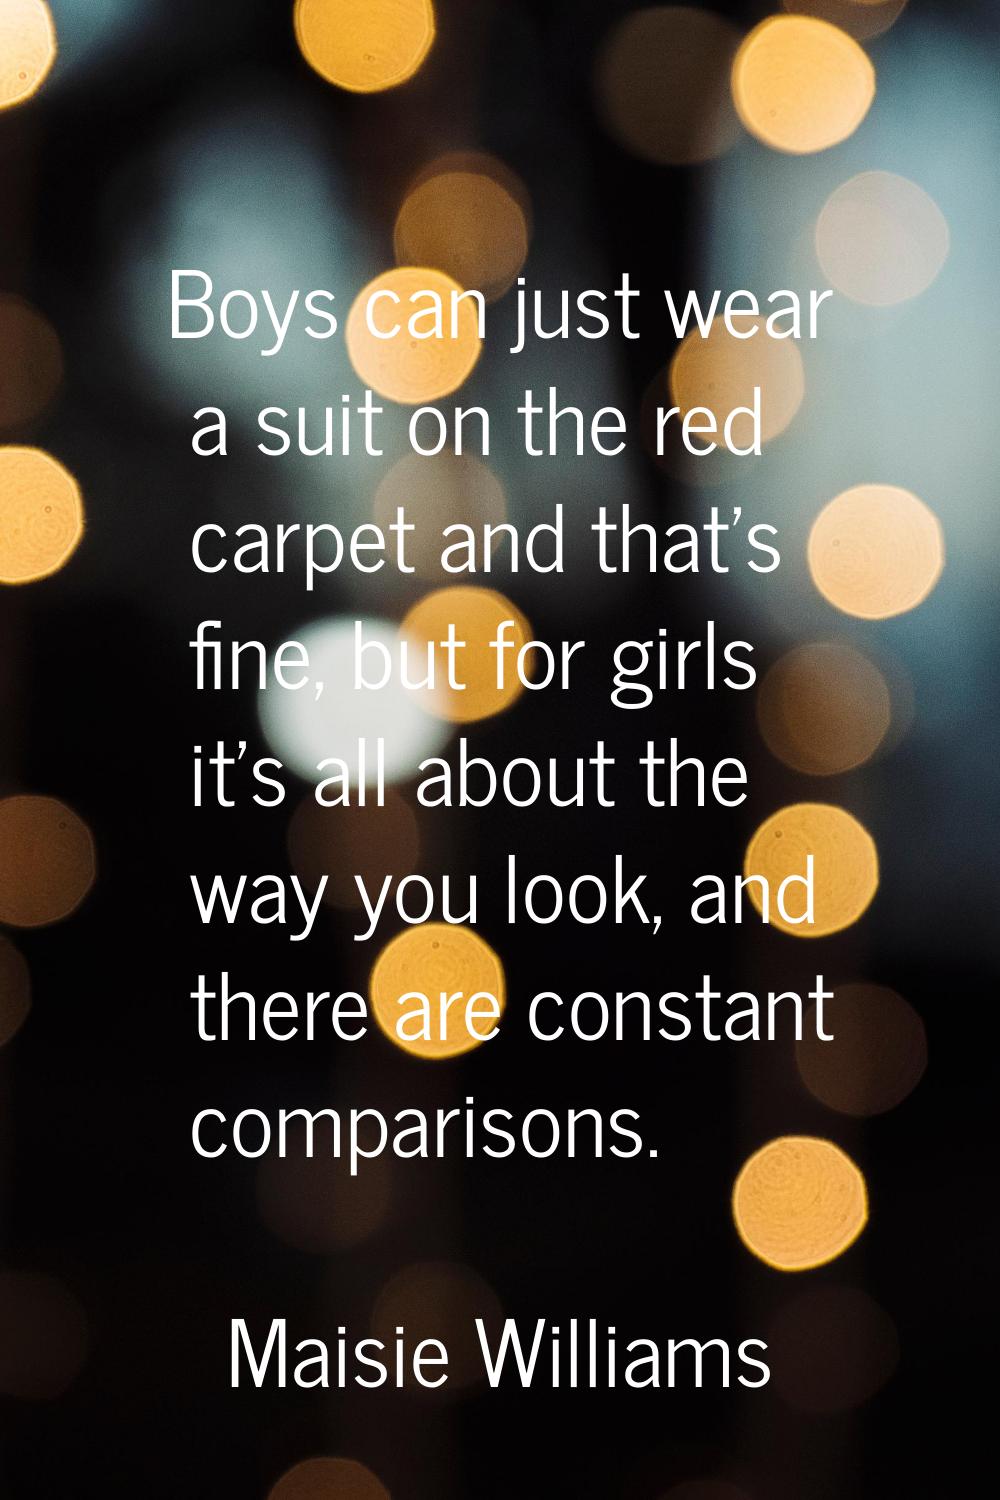 Boys can just wear a suit on the red carpet and that's fine, but for girls it's all about the way y